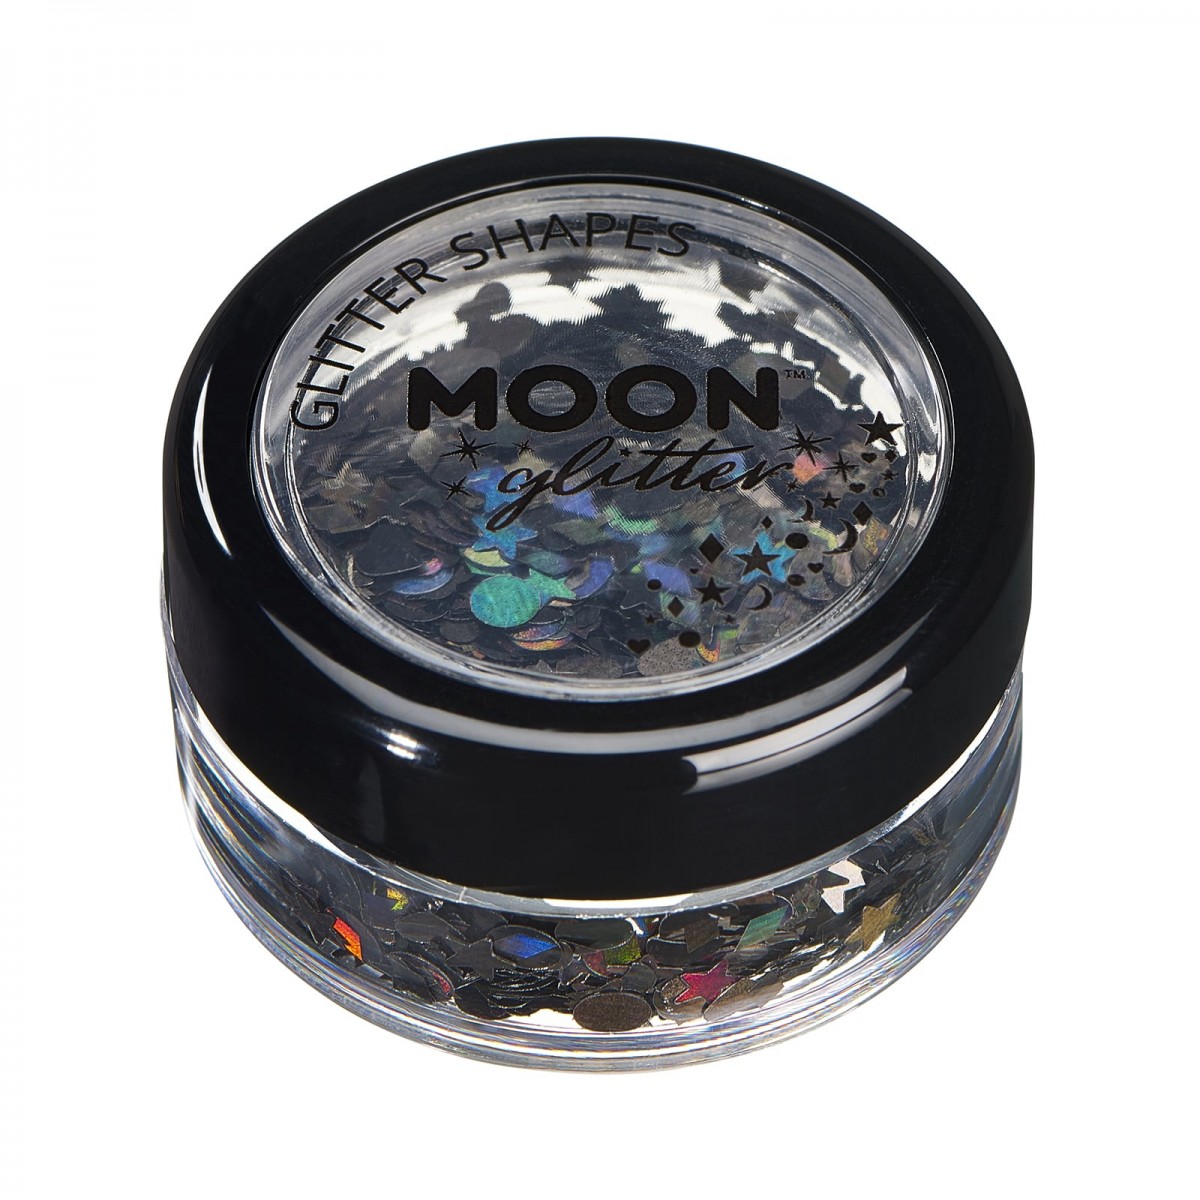 MOON CREATIONS G31 HOLOGRAPHIC GLITTER SHAPES BLACK 3g